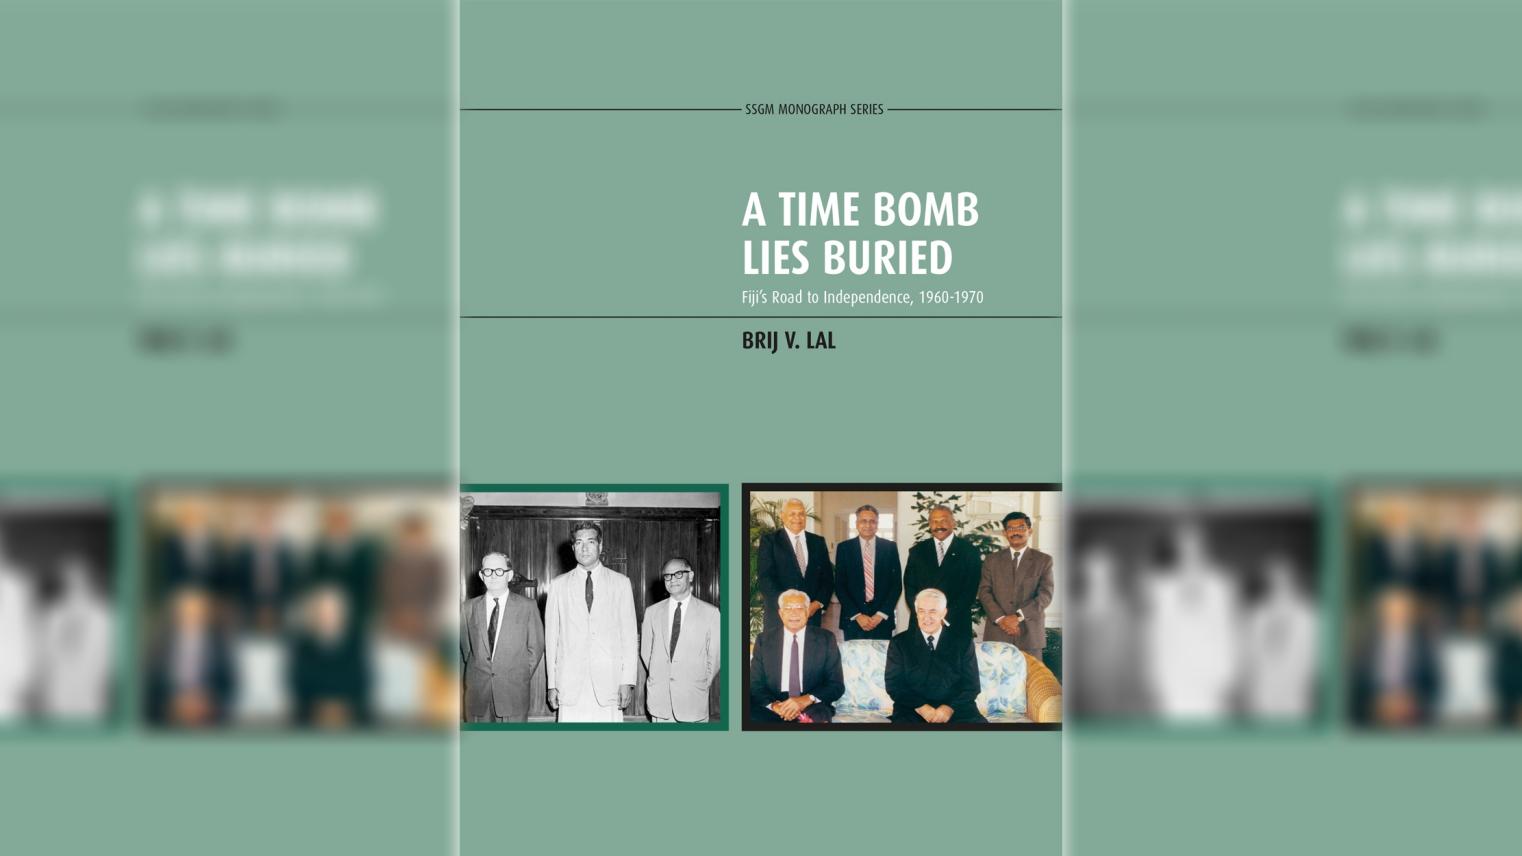 A Time Bomb Lies Buried Fiji’s Road to Independence, 1960-1970